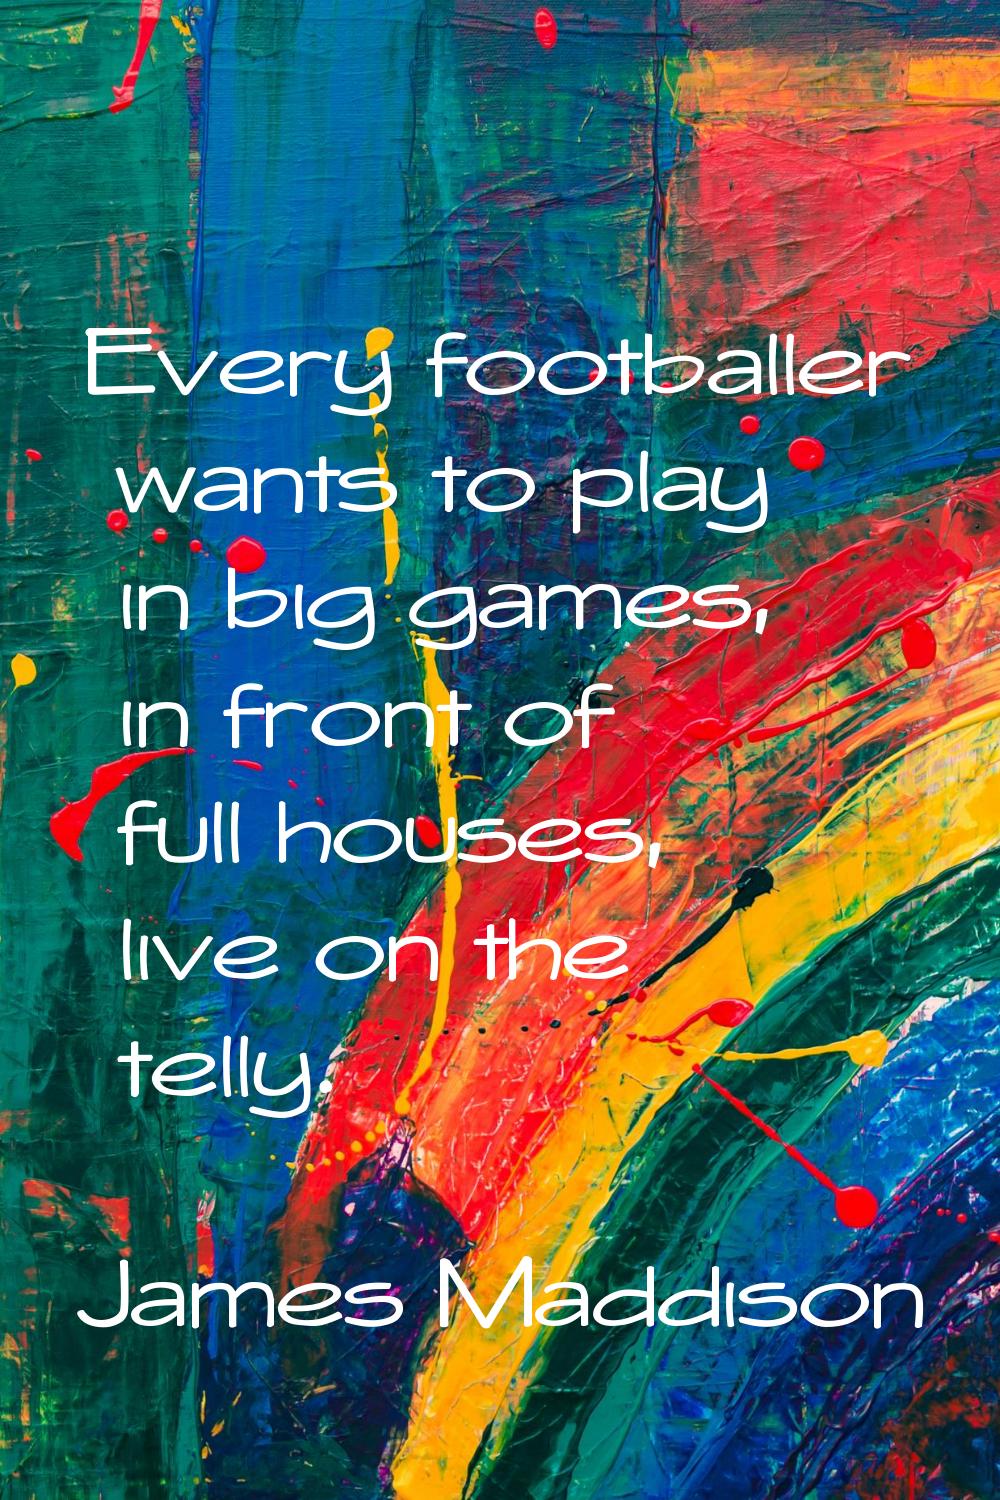 Every footballer wants to play in big games, in front of full houses, live on the telly.